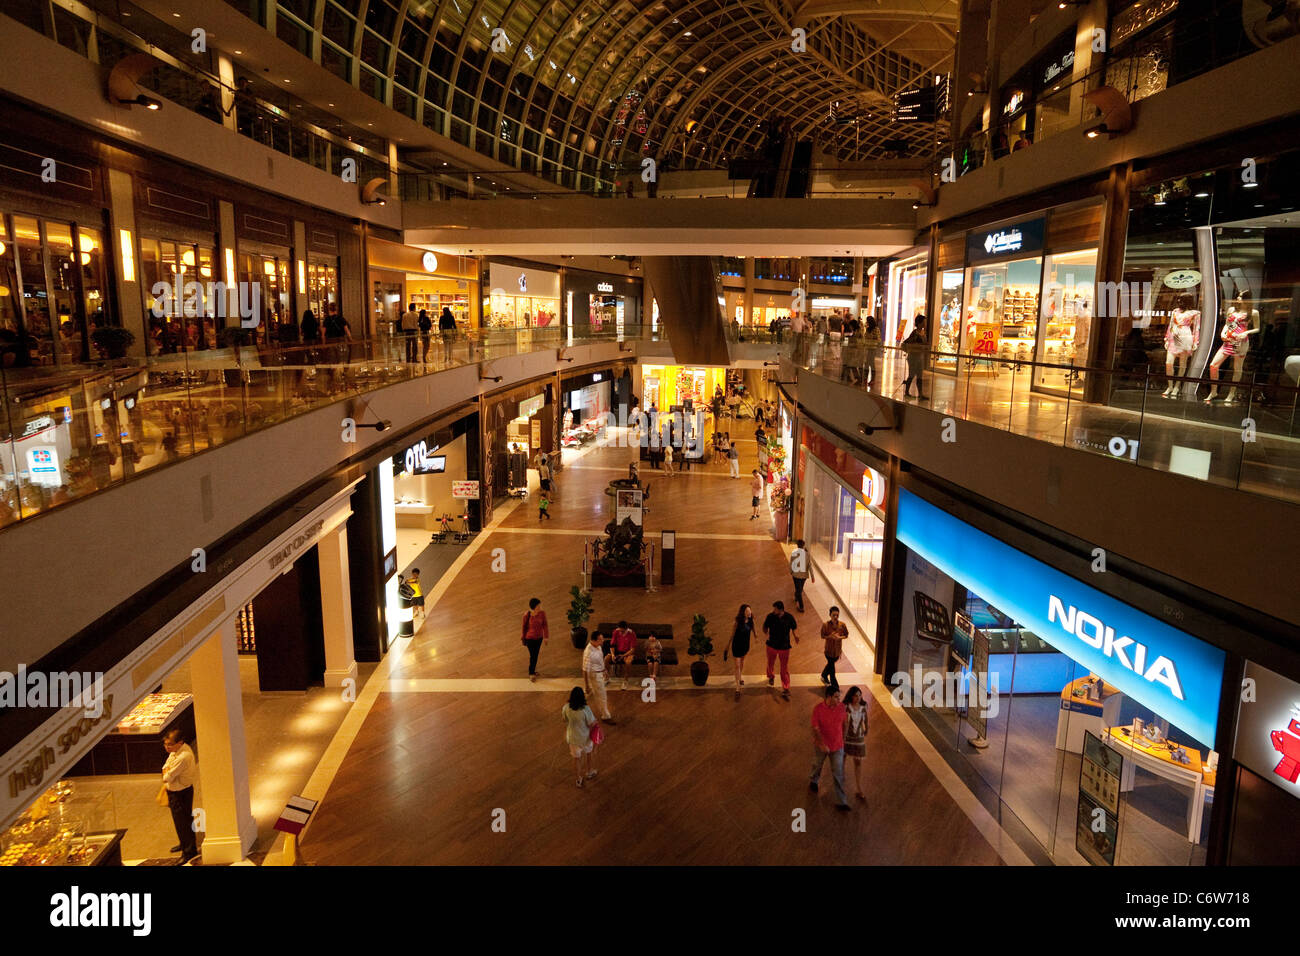 Le Marina Bay Sands Hotel shopping mall, Singapour Banque D'Images